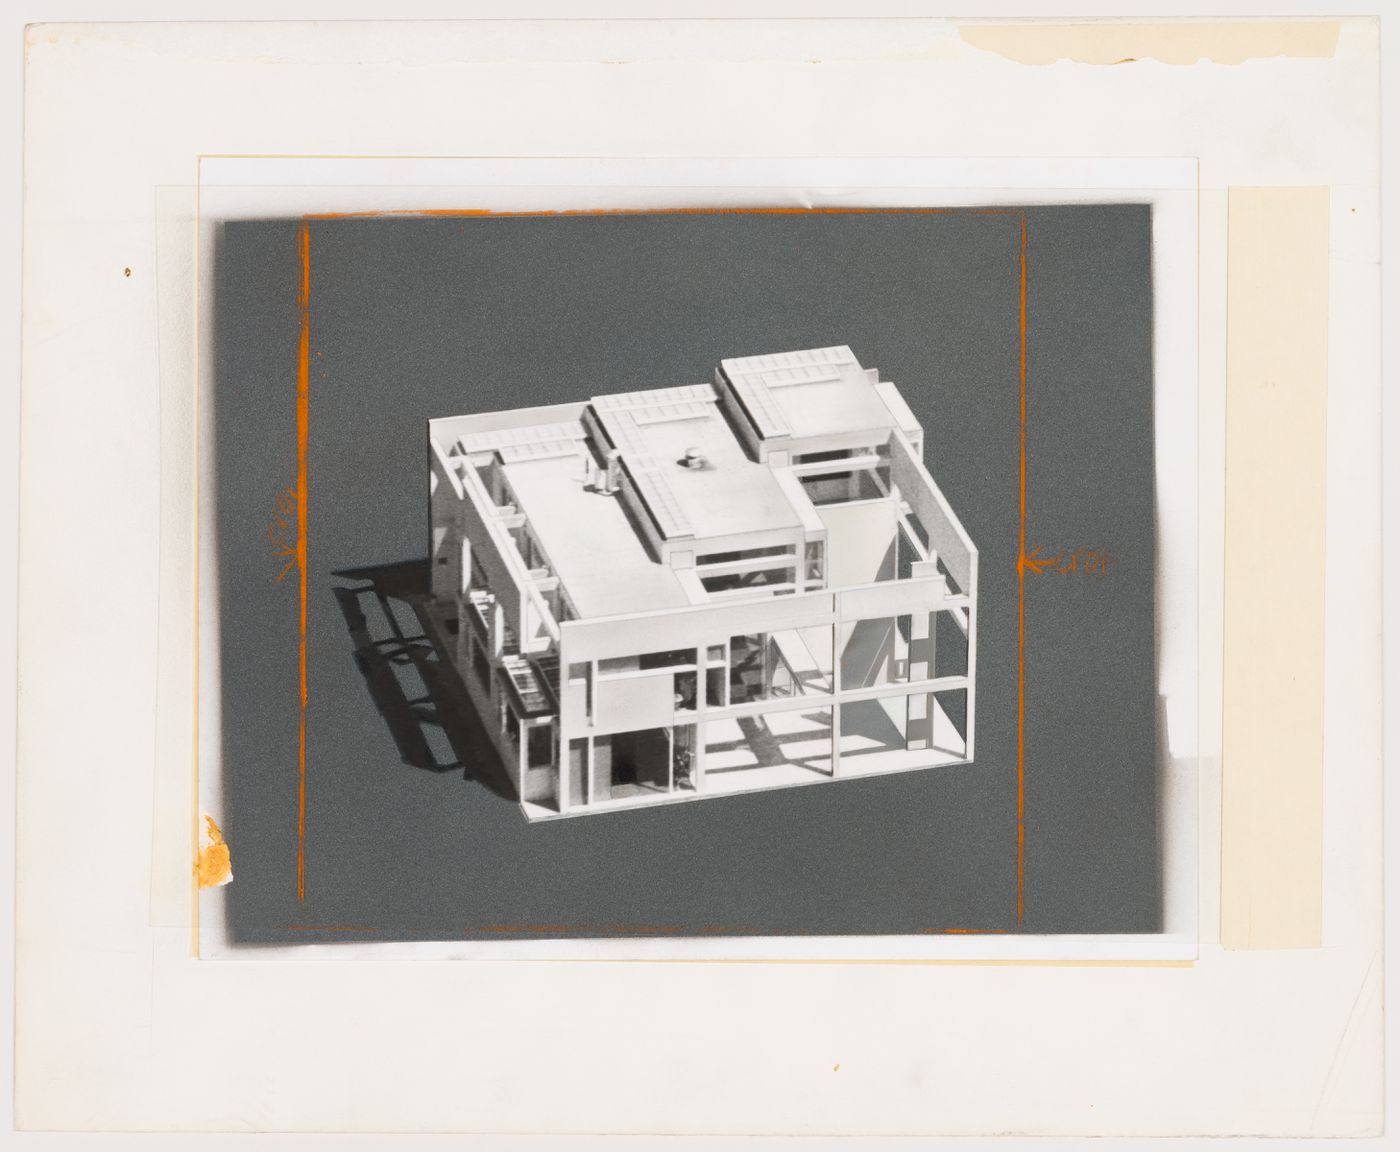 View of model for Falk House (House II), Hardwick, Vermont